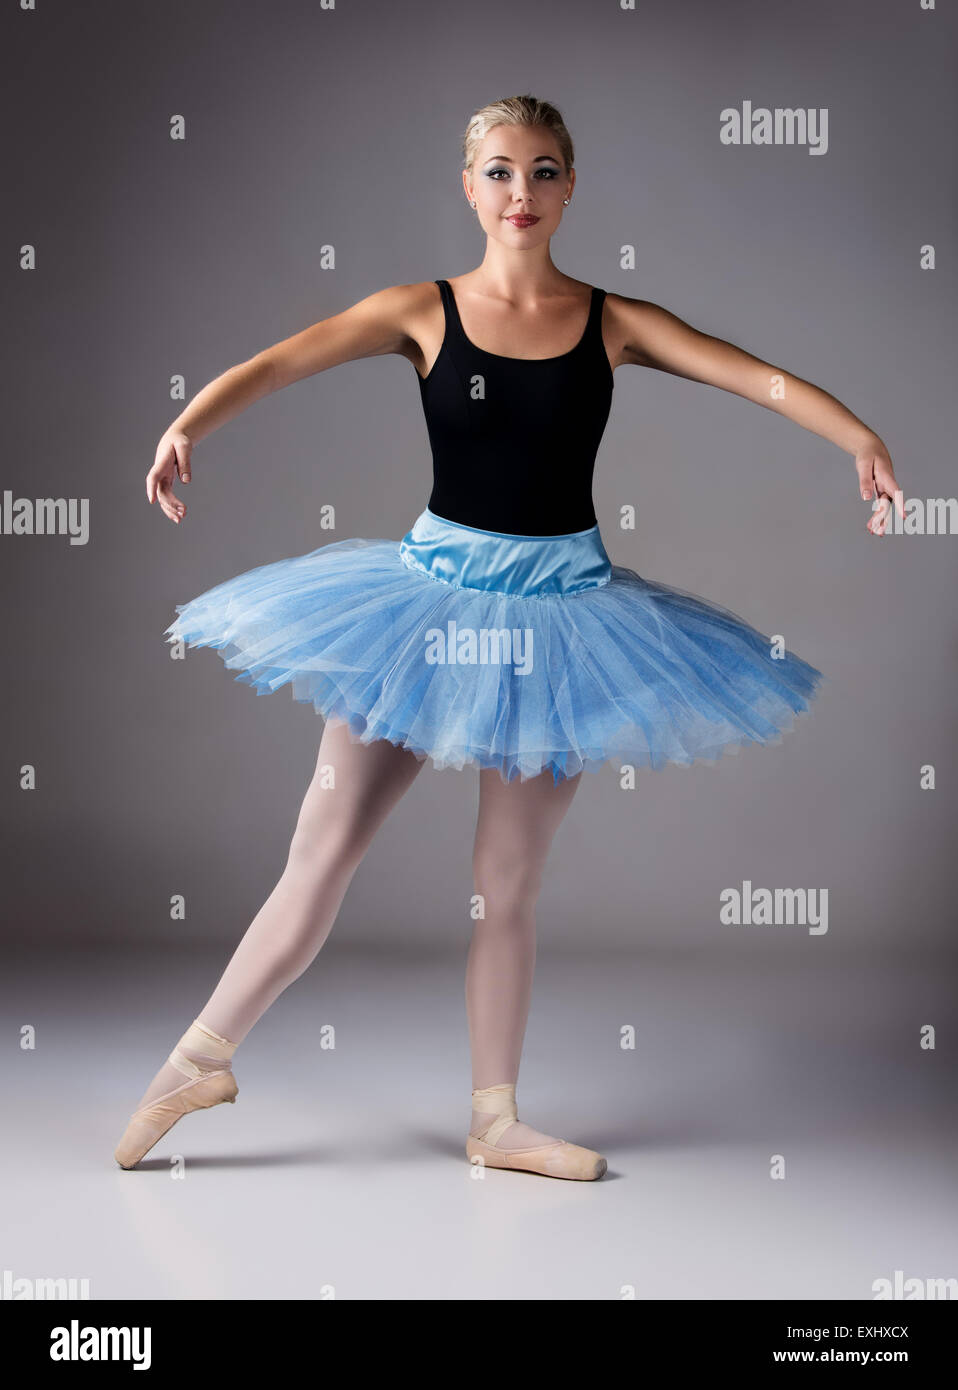 Med andre ord enke kursiv Beautiful female ballet dancer on a grey background. Ballerina is wearing a  black leotard, pink stockings, pointe shoes and a bl Stock Photo - Alamy